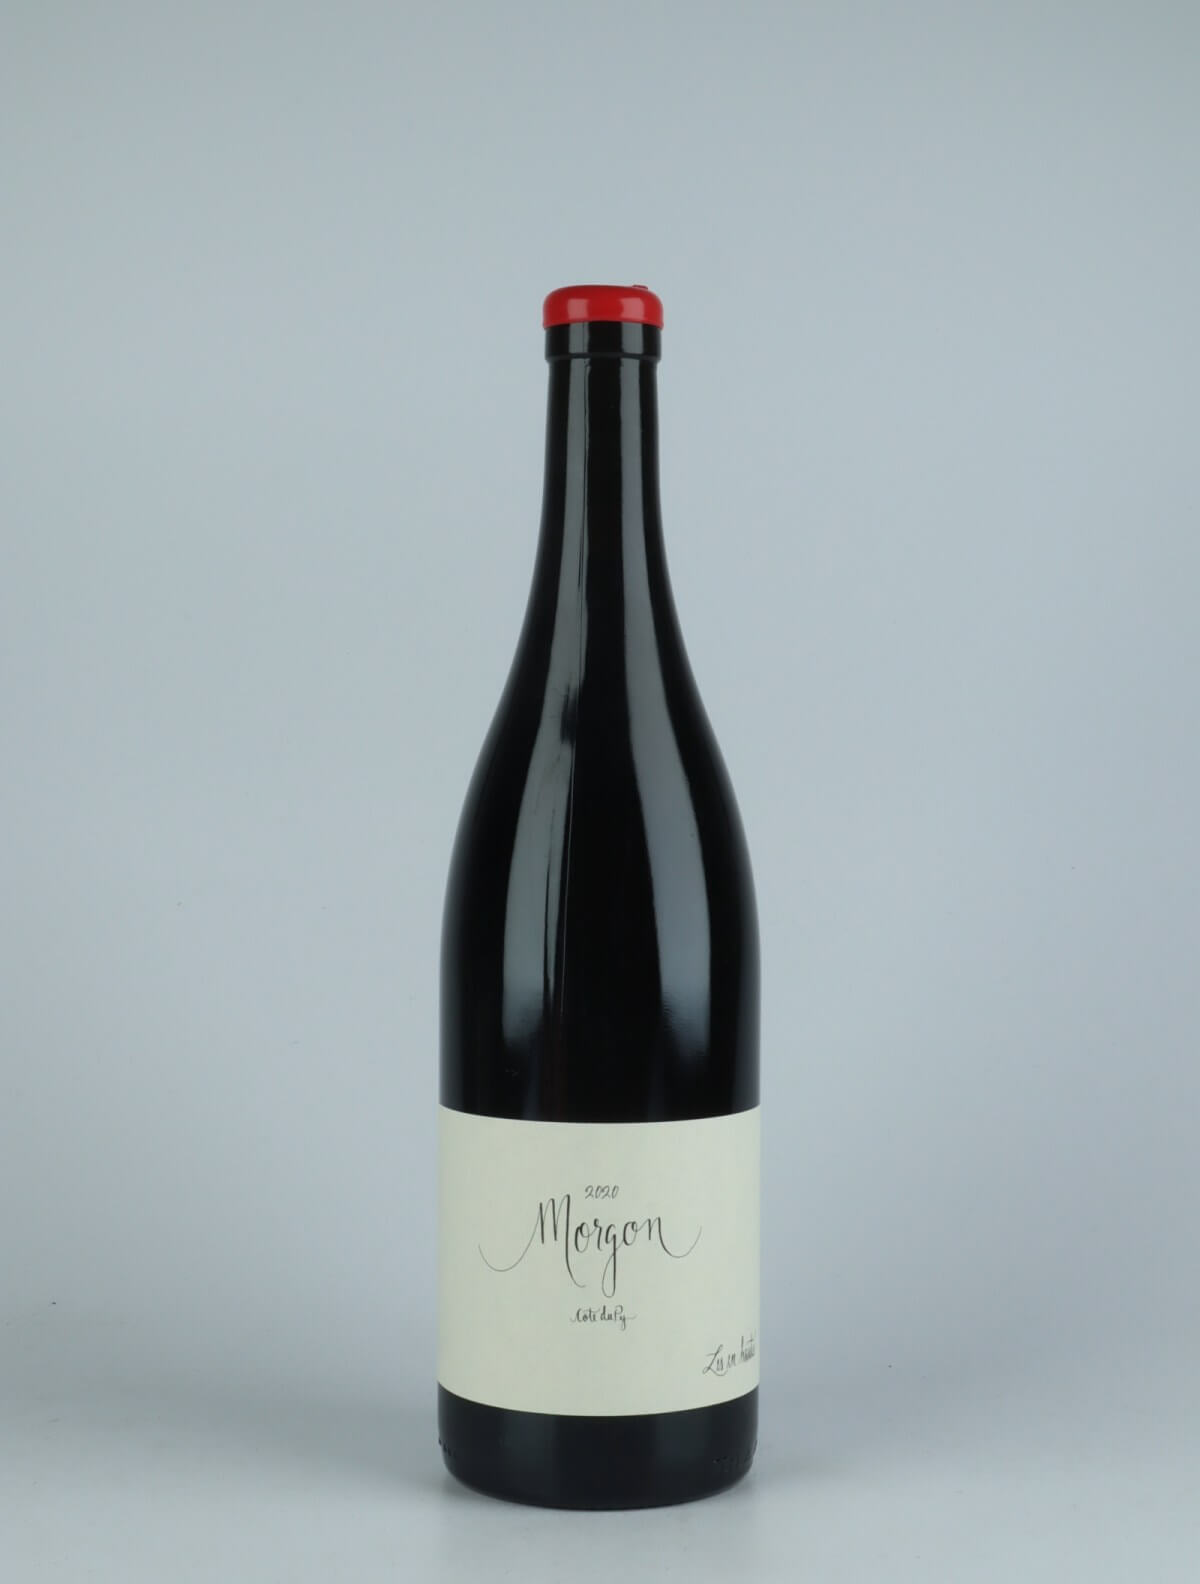 A bottle 2020 Morgon Red wine from Les En Hauts, Beaujolais in France